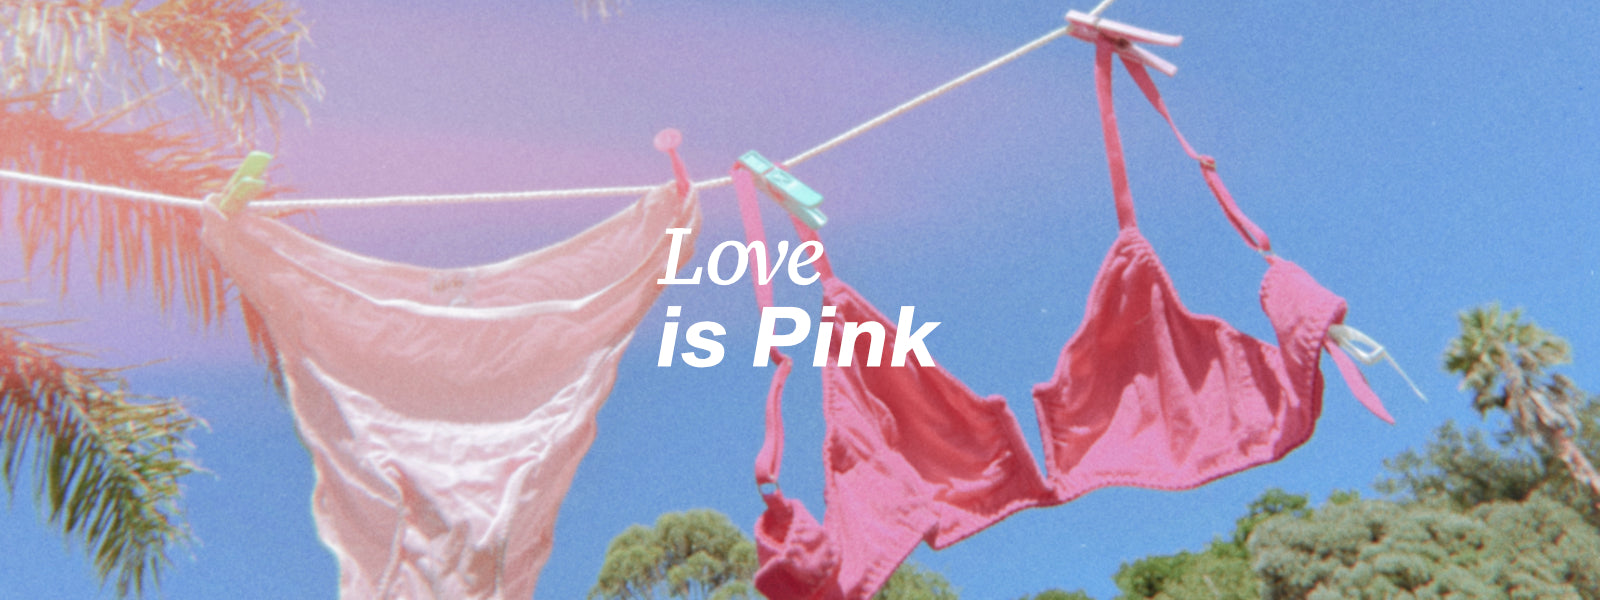 Love is Pink